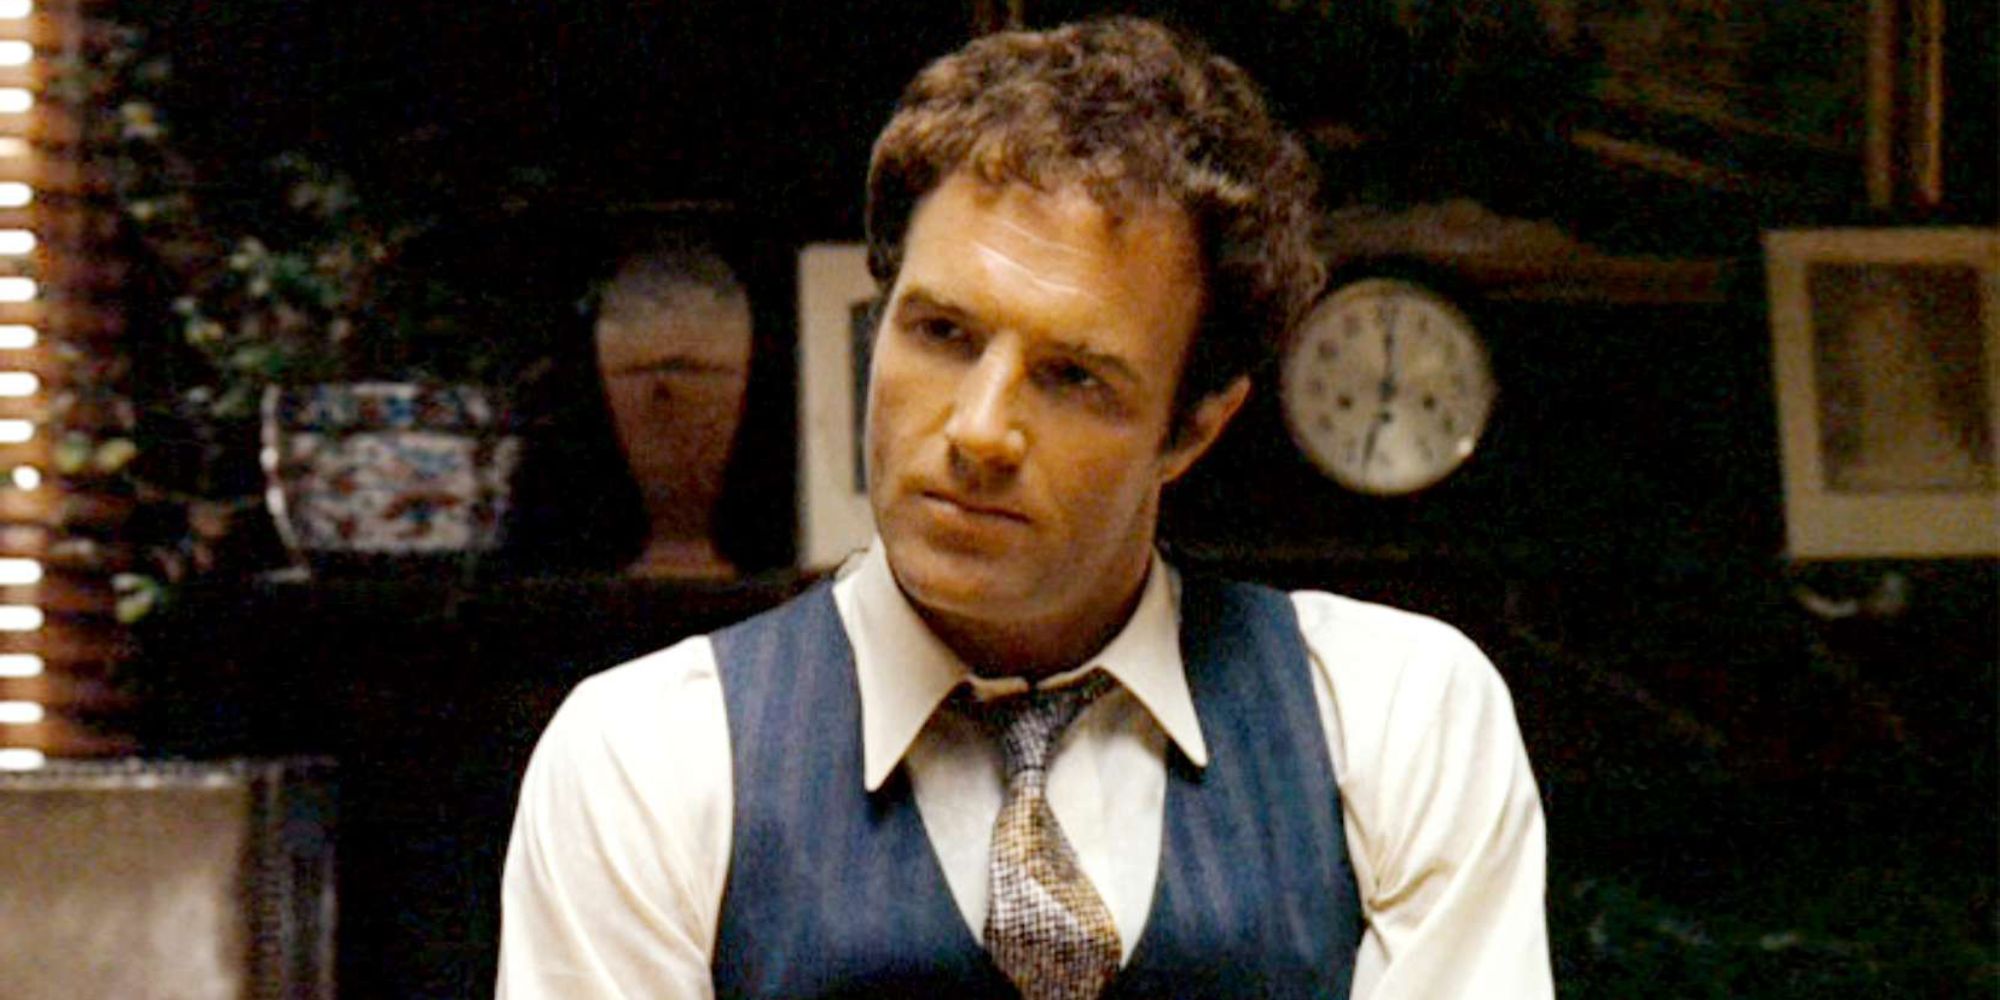 James Caan as Sonny Corleone in 'The Godfather'